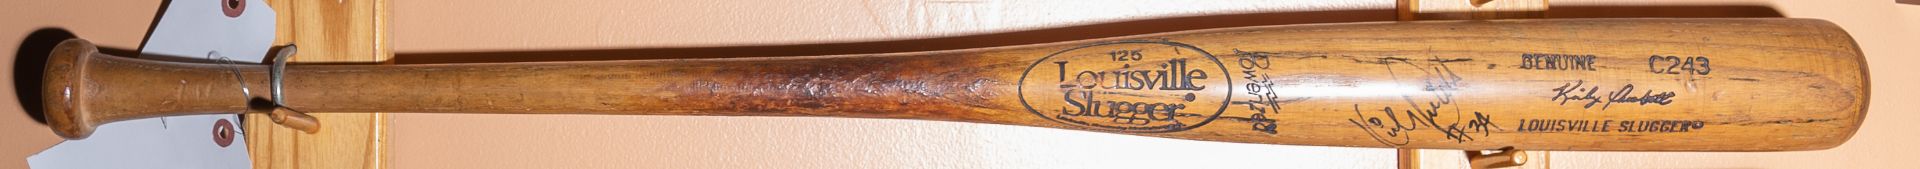 Autographed Louisville Slugger Wood Baseball Bat Stamped and Signed " Kirby Puckett #34"